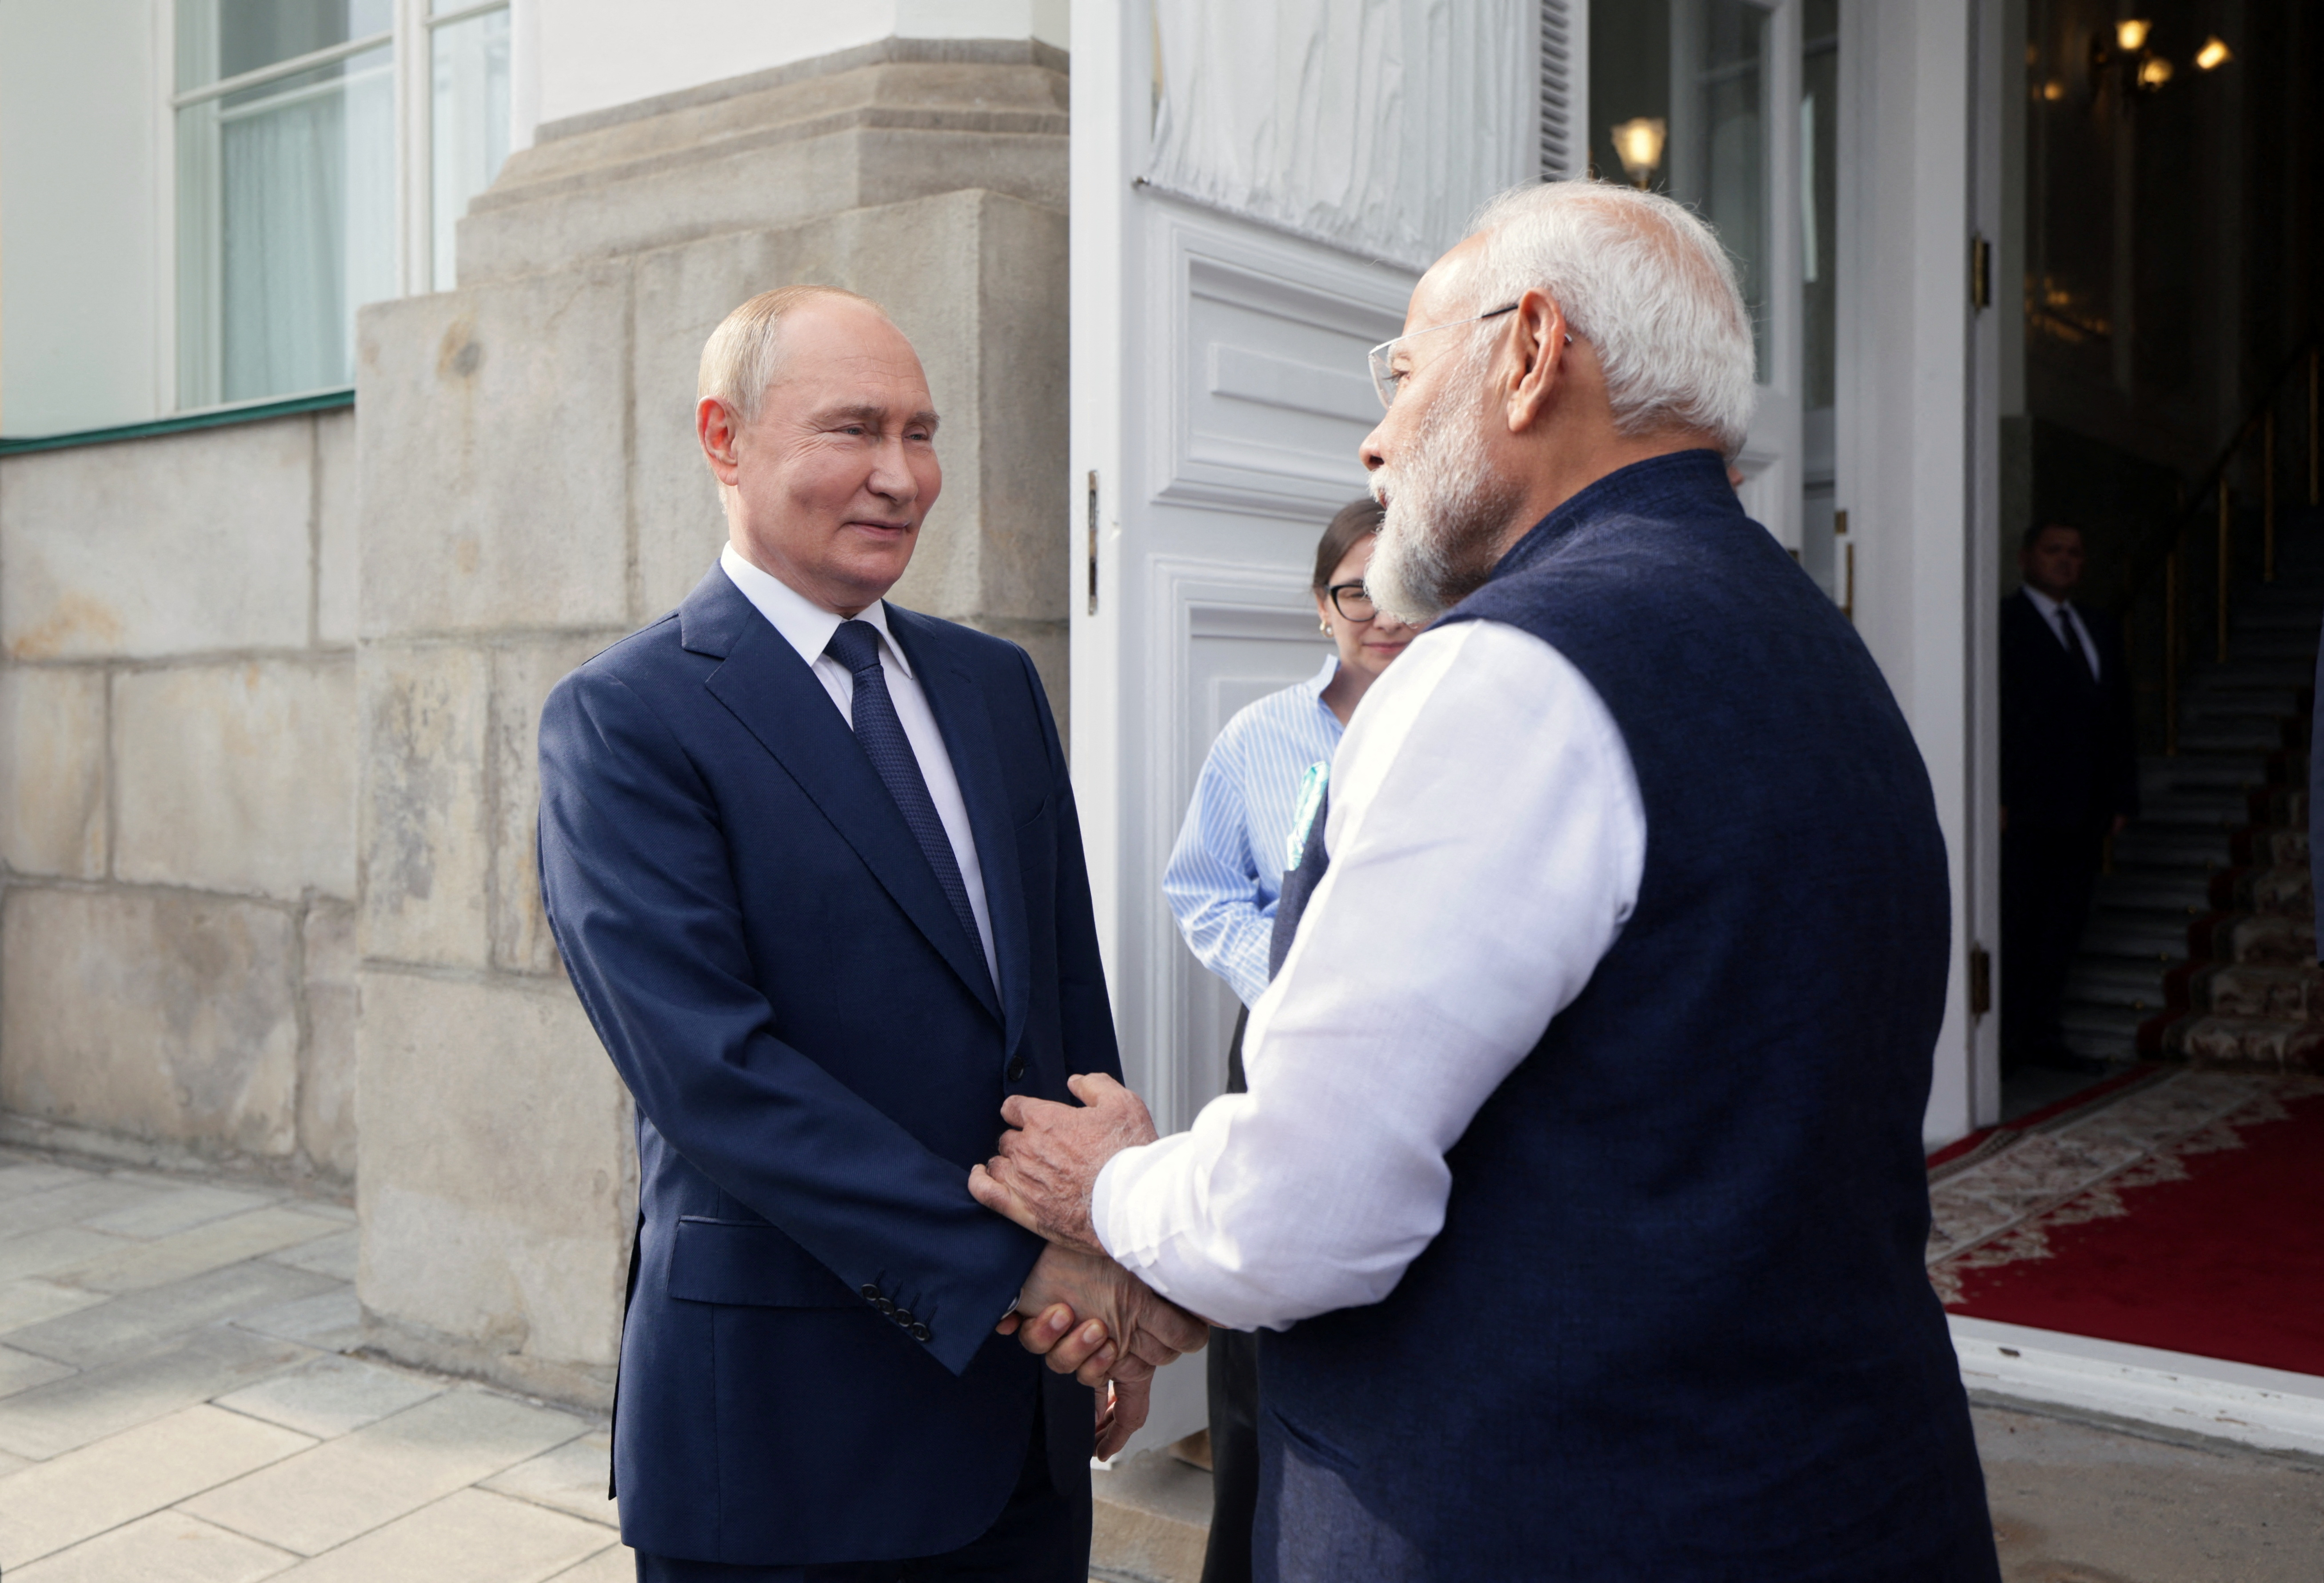 Russia's President Vladimir Putin meets with India's Prime Minister Narendra Modi in Moscow